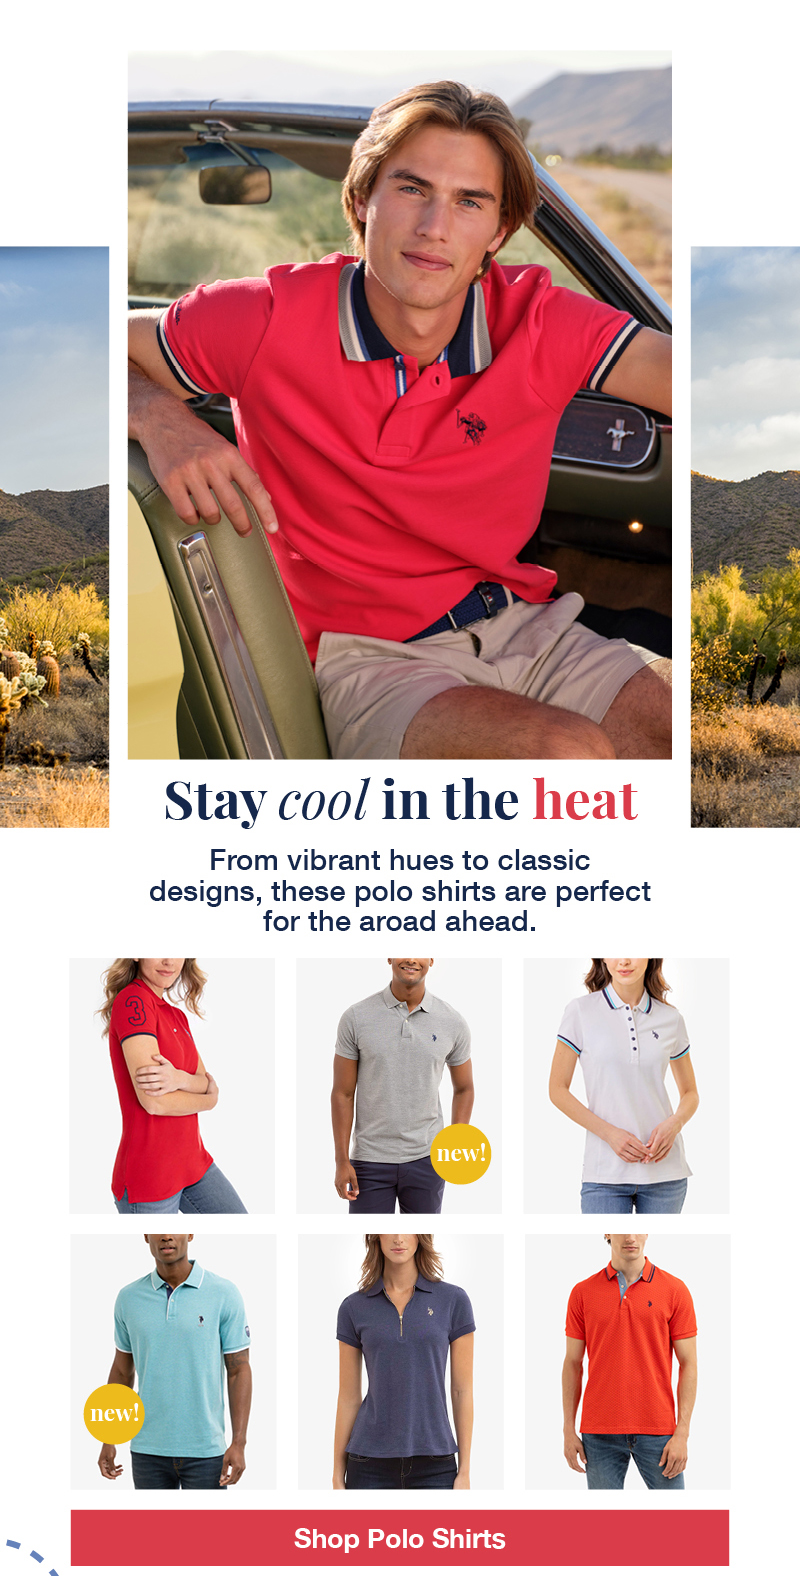 Stay cool in the heat: From vibrant hues to classic designs, these polo shirts are perfect for the road ahead. Shop Polo Shirts